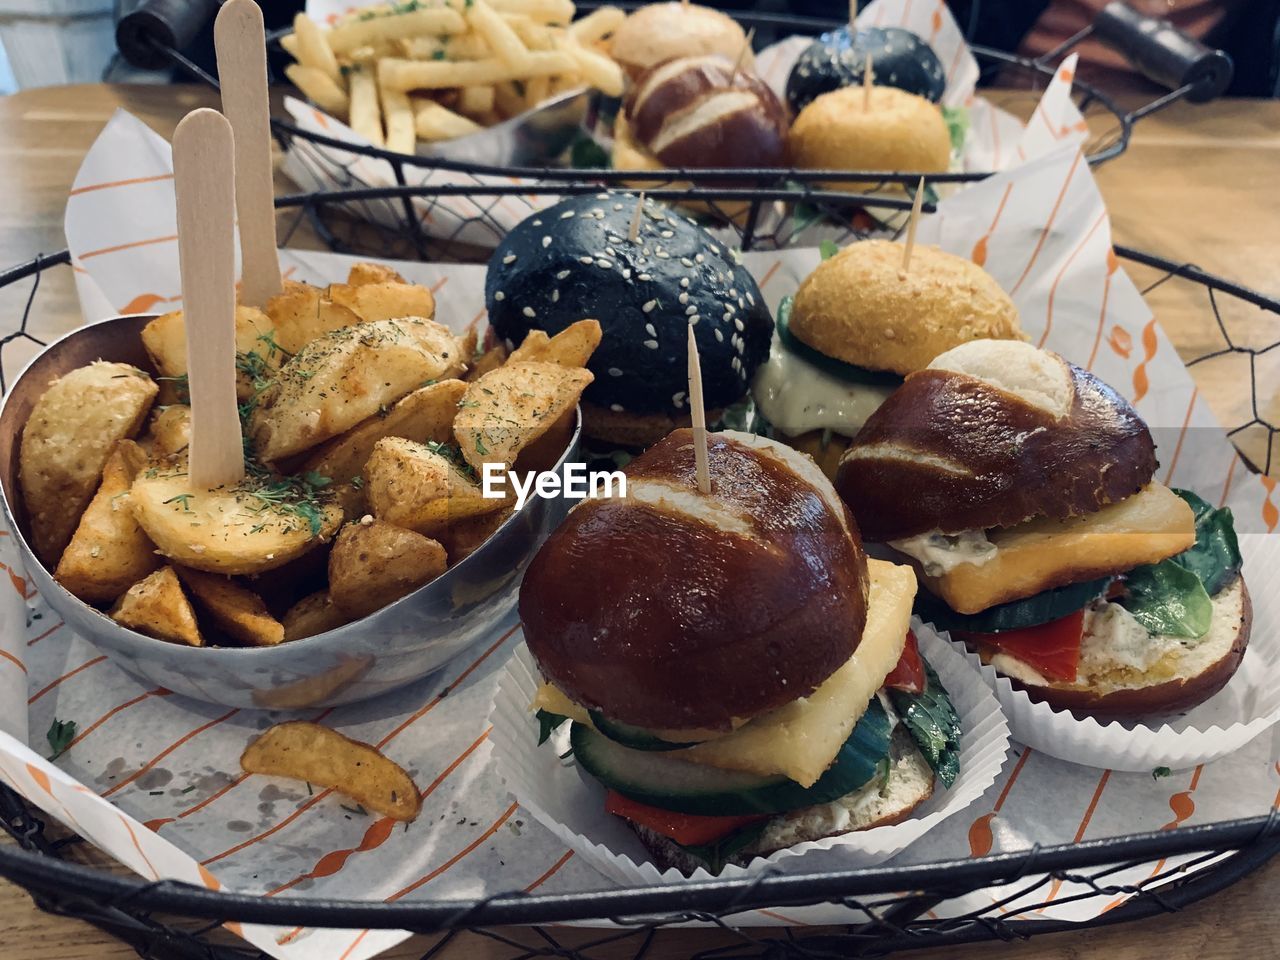 HIGH ANGLE VIEW OF BURGER AND VEGETABLES ON TABLE